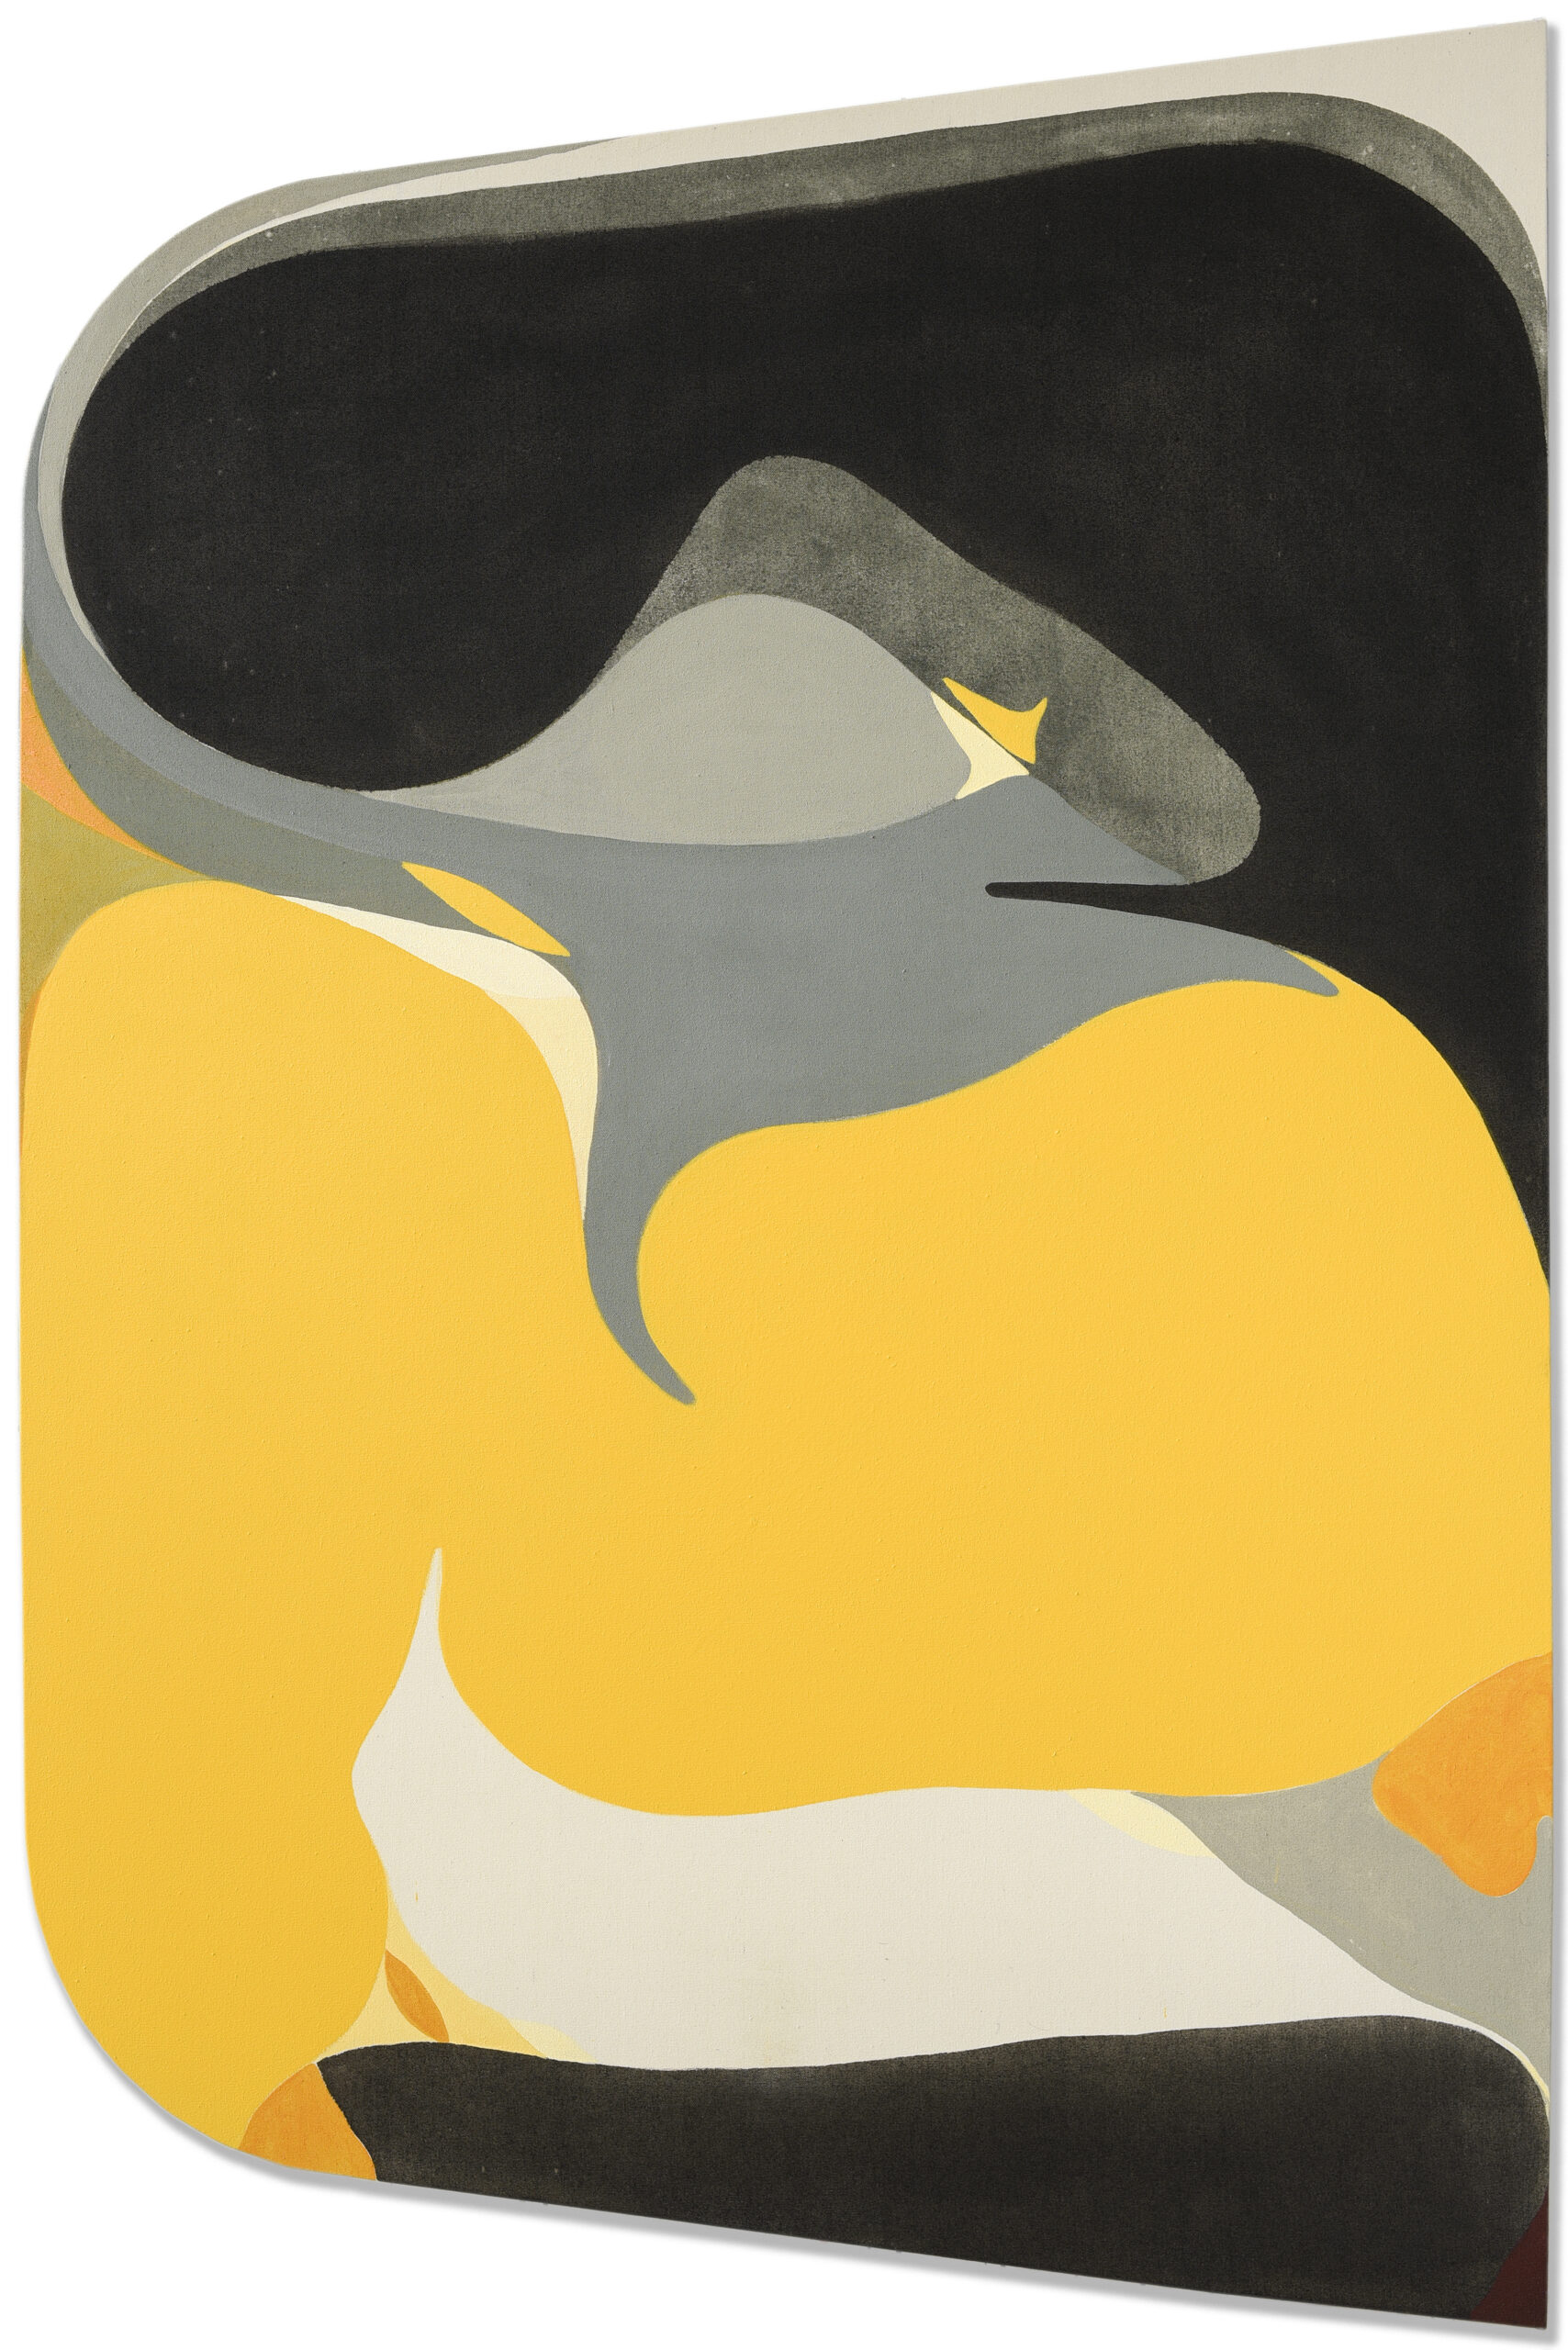 Bio painting featuring yellow, black, grey and green abstract shapes, by Fabian Monge.